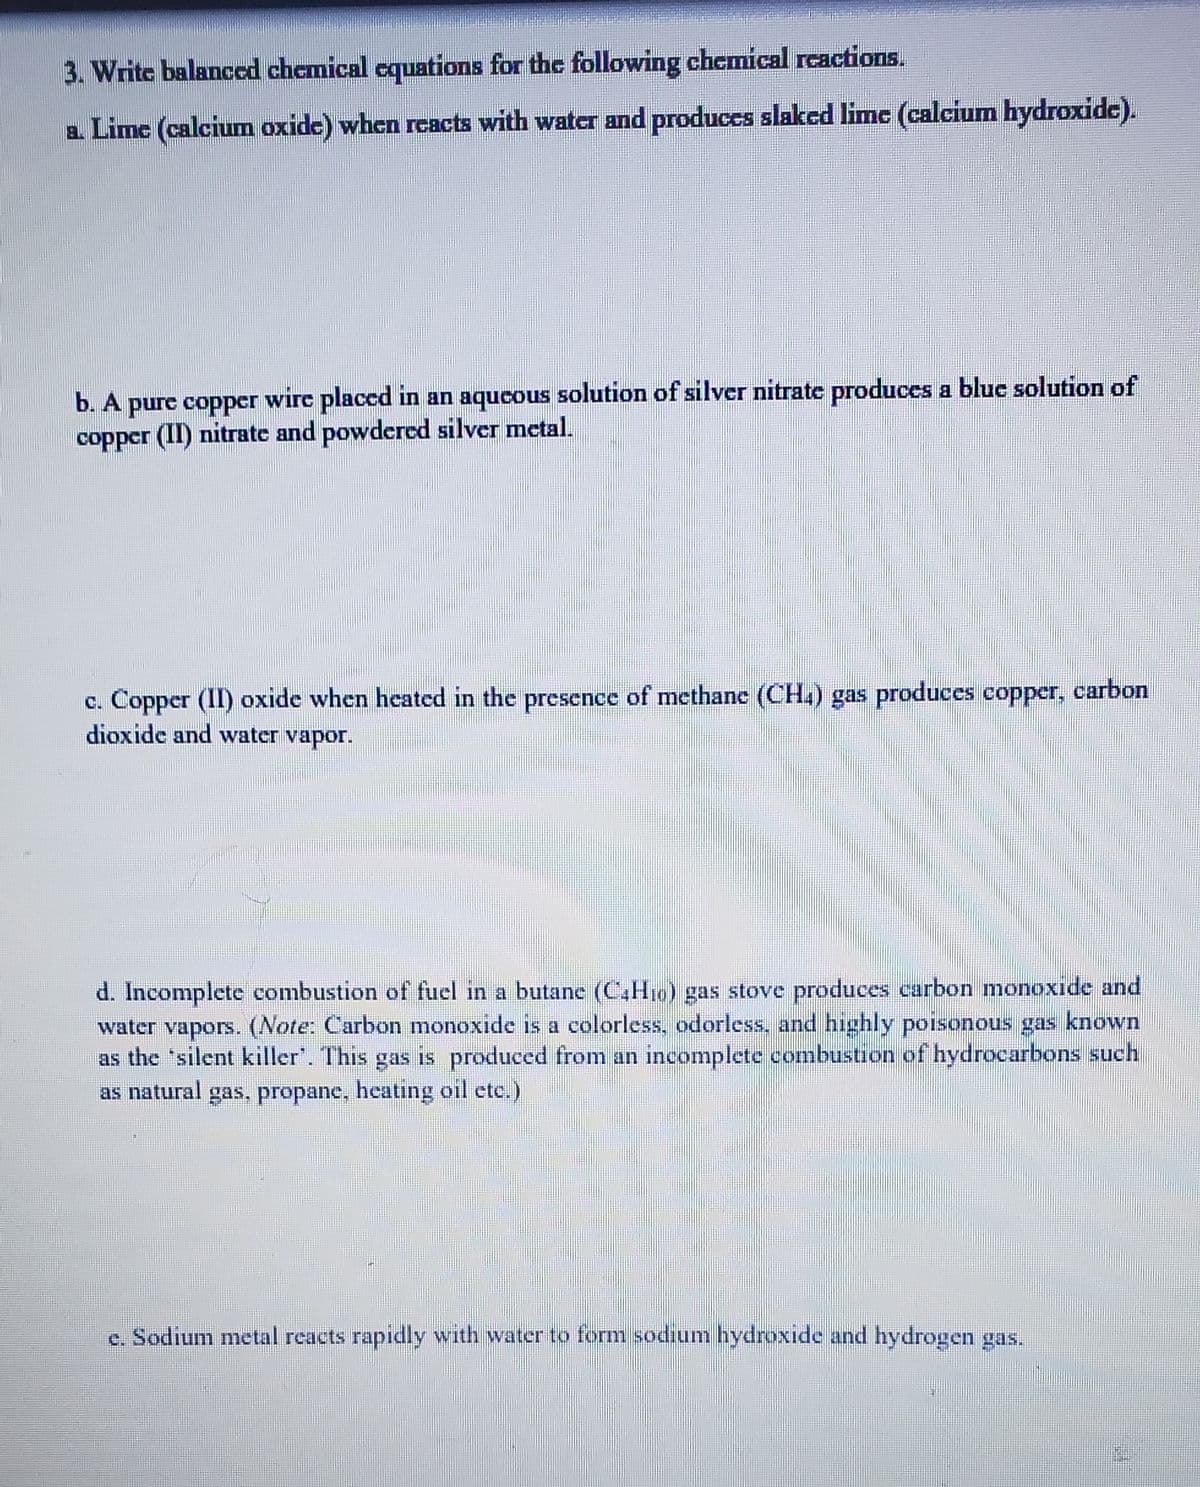 3. Writc balanccd chemical cquations for the following chemical rcactions.
a. Lime (calcium oxide) when reacts with water and produces slaked lime (calcium hydroxide).
b. A purc copper wire placcd in an aqucous solution of silver nitrate produces a bluc solution of
copper (II) nitrate and powdered silver metal.
c. Copper (II) oxide when heated in the presence of methane (CH.) gas produces copper, carbon
dioxide and water vapor.
d. Incomplete combustion of fuel in a butane (C,H10) gas stove produces carbon monoxide and
water vapors. (Note: Carbon monoxide is a colorless, odorless, and highly poisonous gas known
as the 'silent killer'. This gas is produced from an incomplete combustion of hydrocarbons such
as natural gas, propanc, heating oil ete.)
e. Sodium metal reacts rapidly with water to form sodium hydroxide and hydrogen gas.
